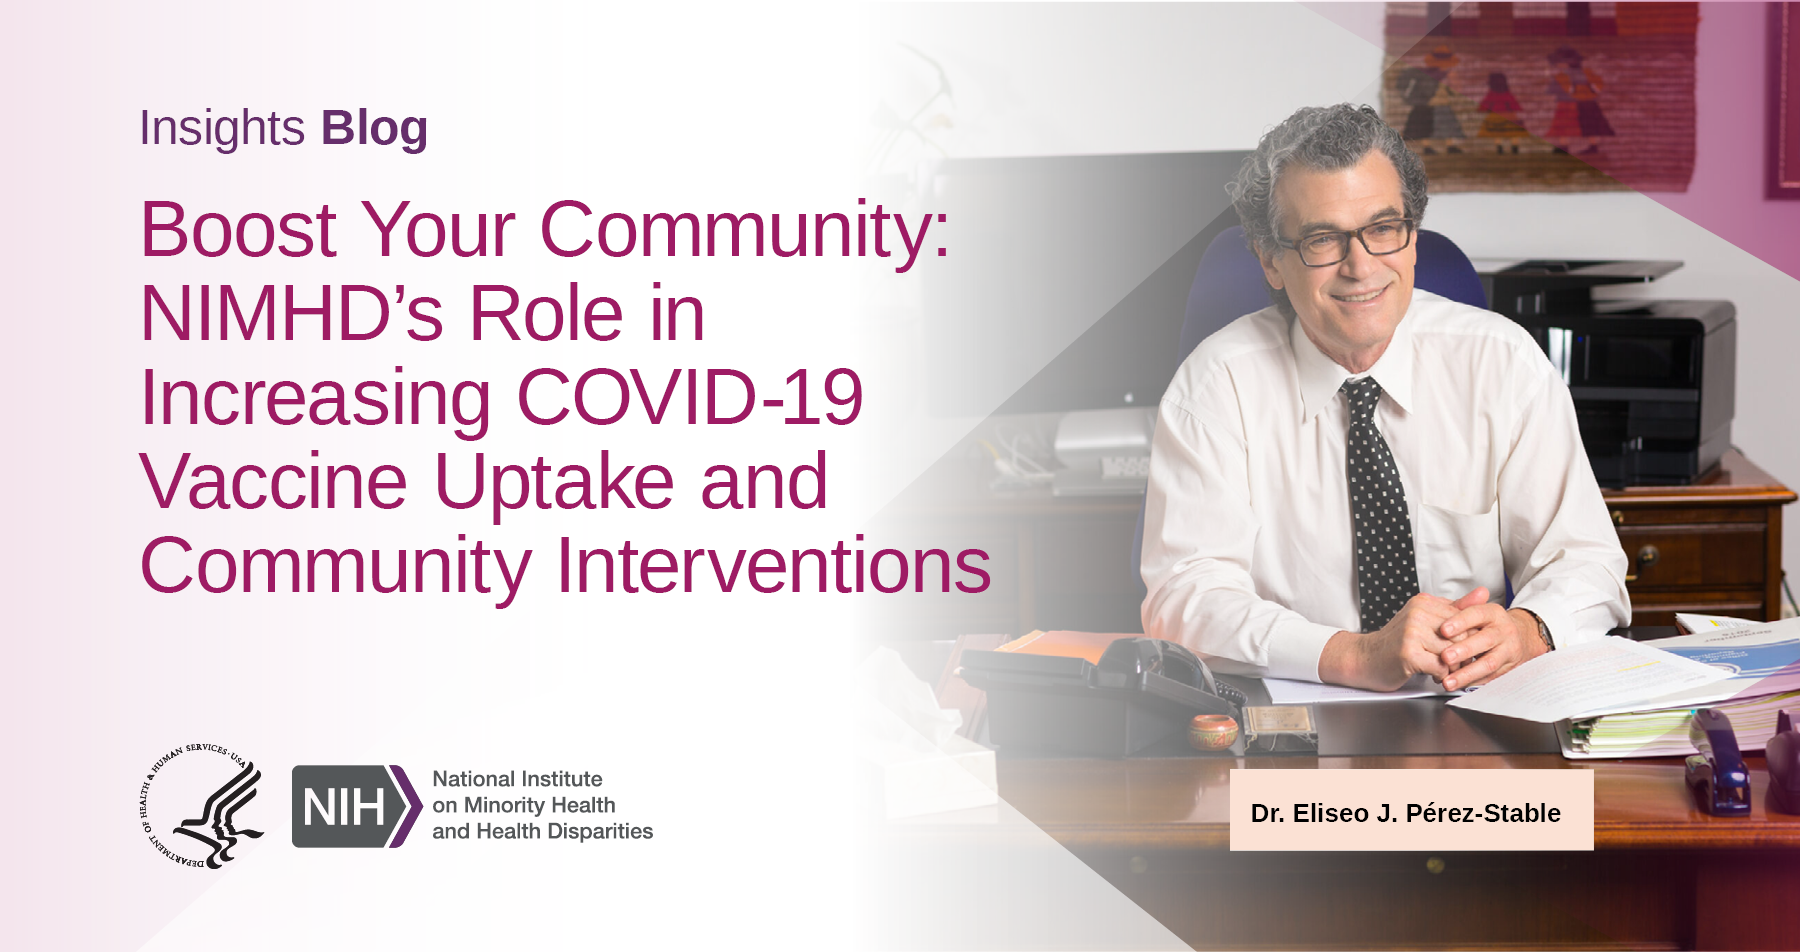 Social for the blog post, "Boost Your Community: NIMHD’s Role in Increasing COVID-19 Vaccine Uptake and Community Interventions"